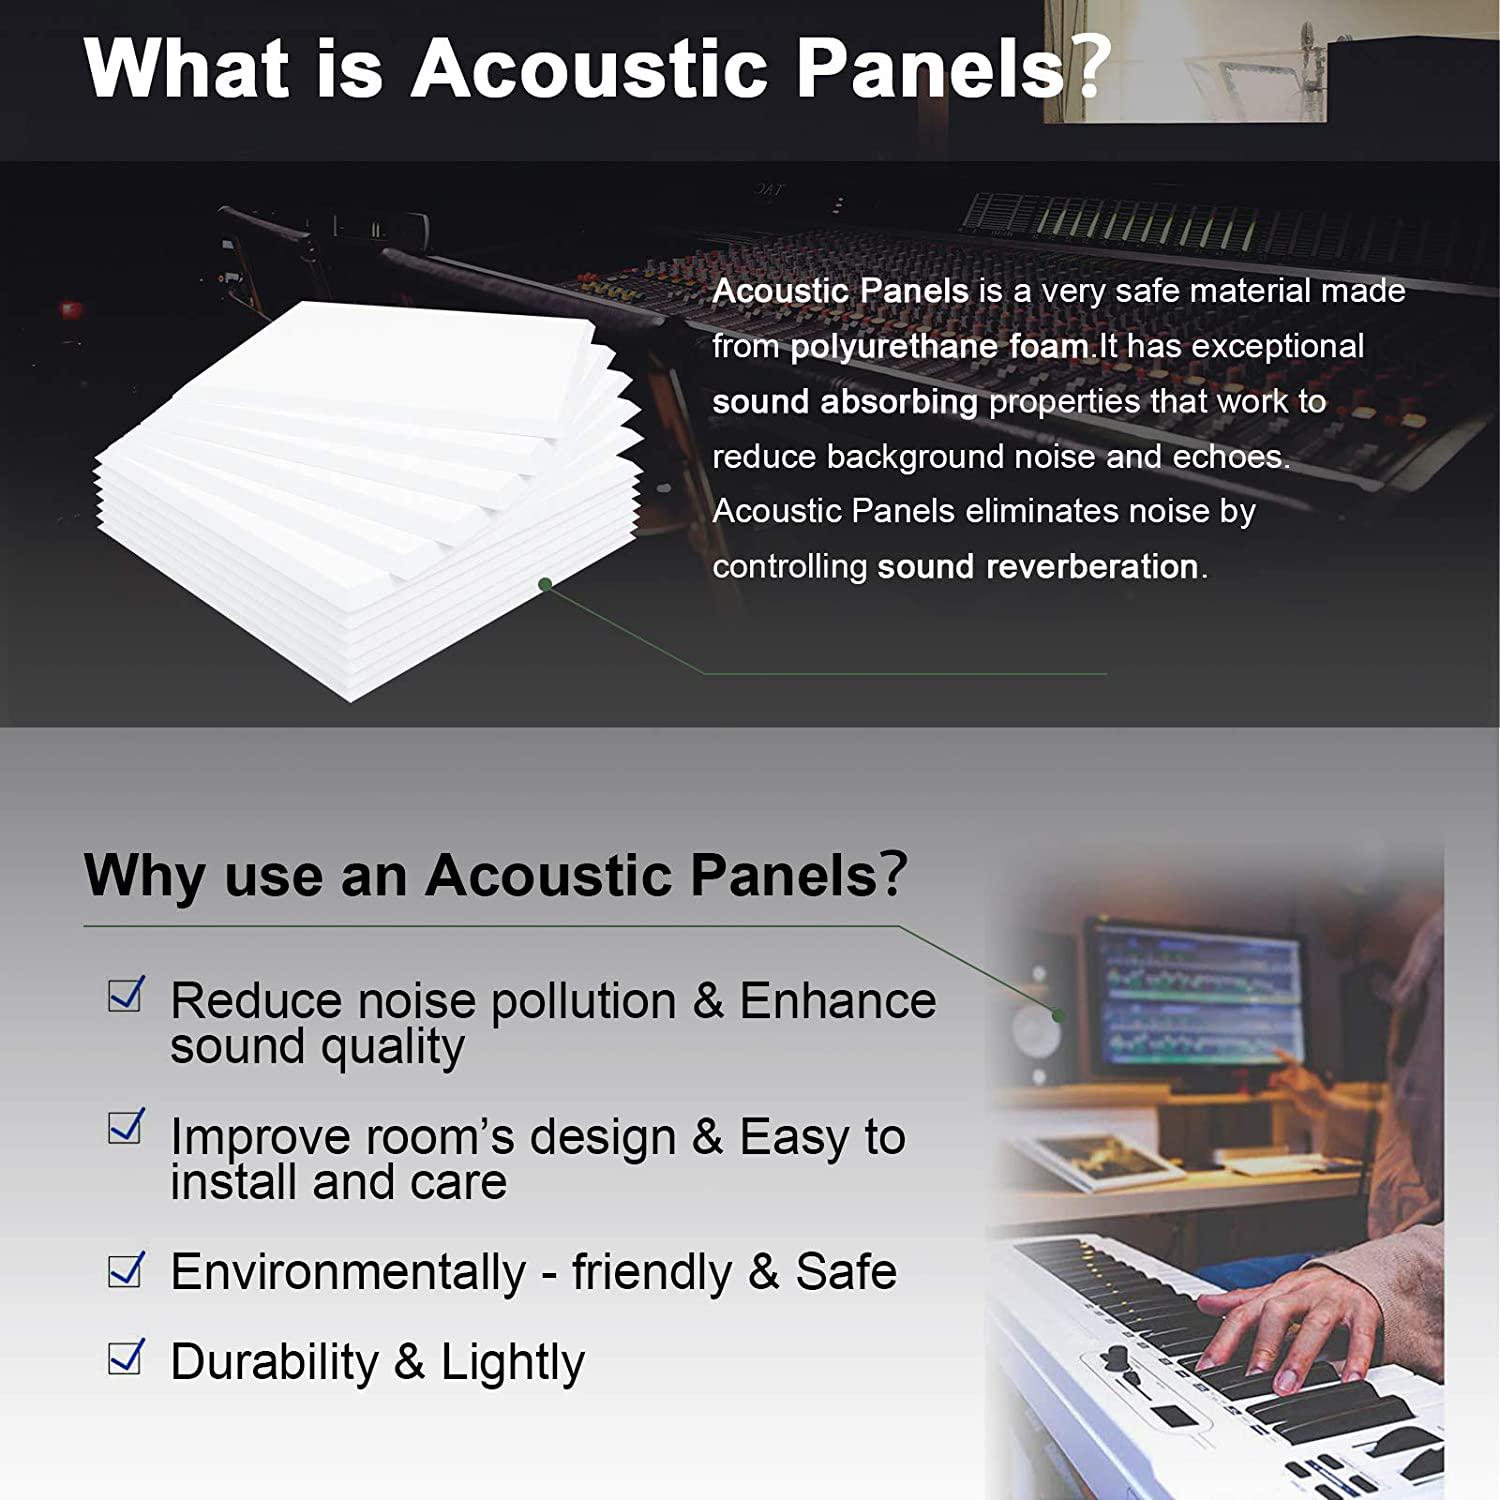 Black Sound Absorption Panel 12 X 12 X 0.4 Inches Acoustic Insulation Panel Acoustic Treatment Panel Used in Piano Room Bathroom and Offices Reduce Sound Sound proof foam panel 12 Pack 